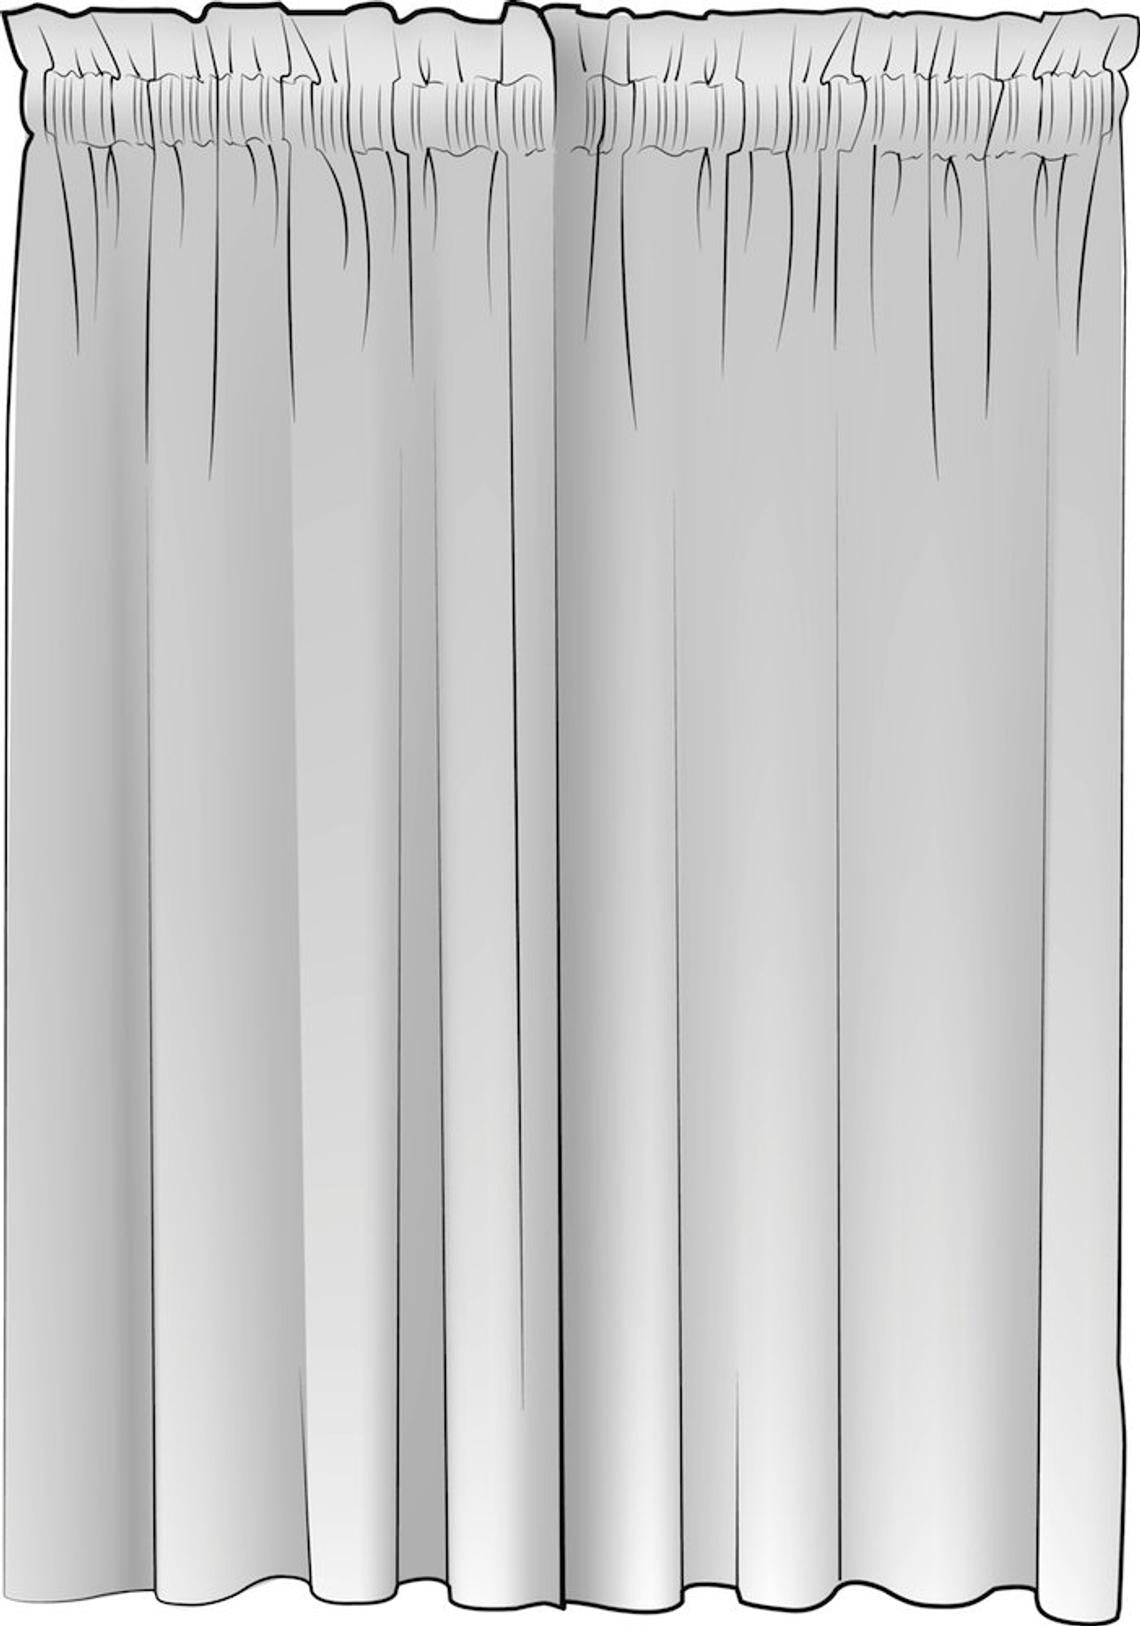 rod pocket curtain panels pair in classic navy blue ticking stripe on white